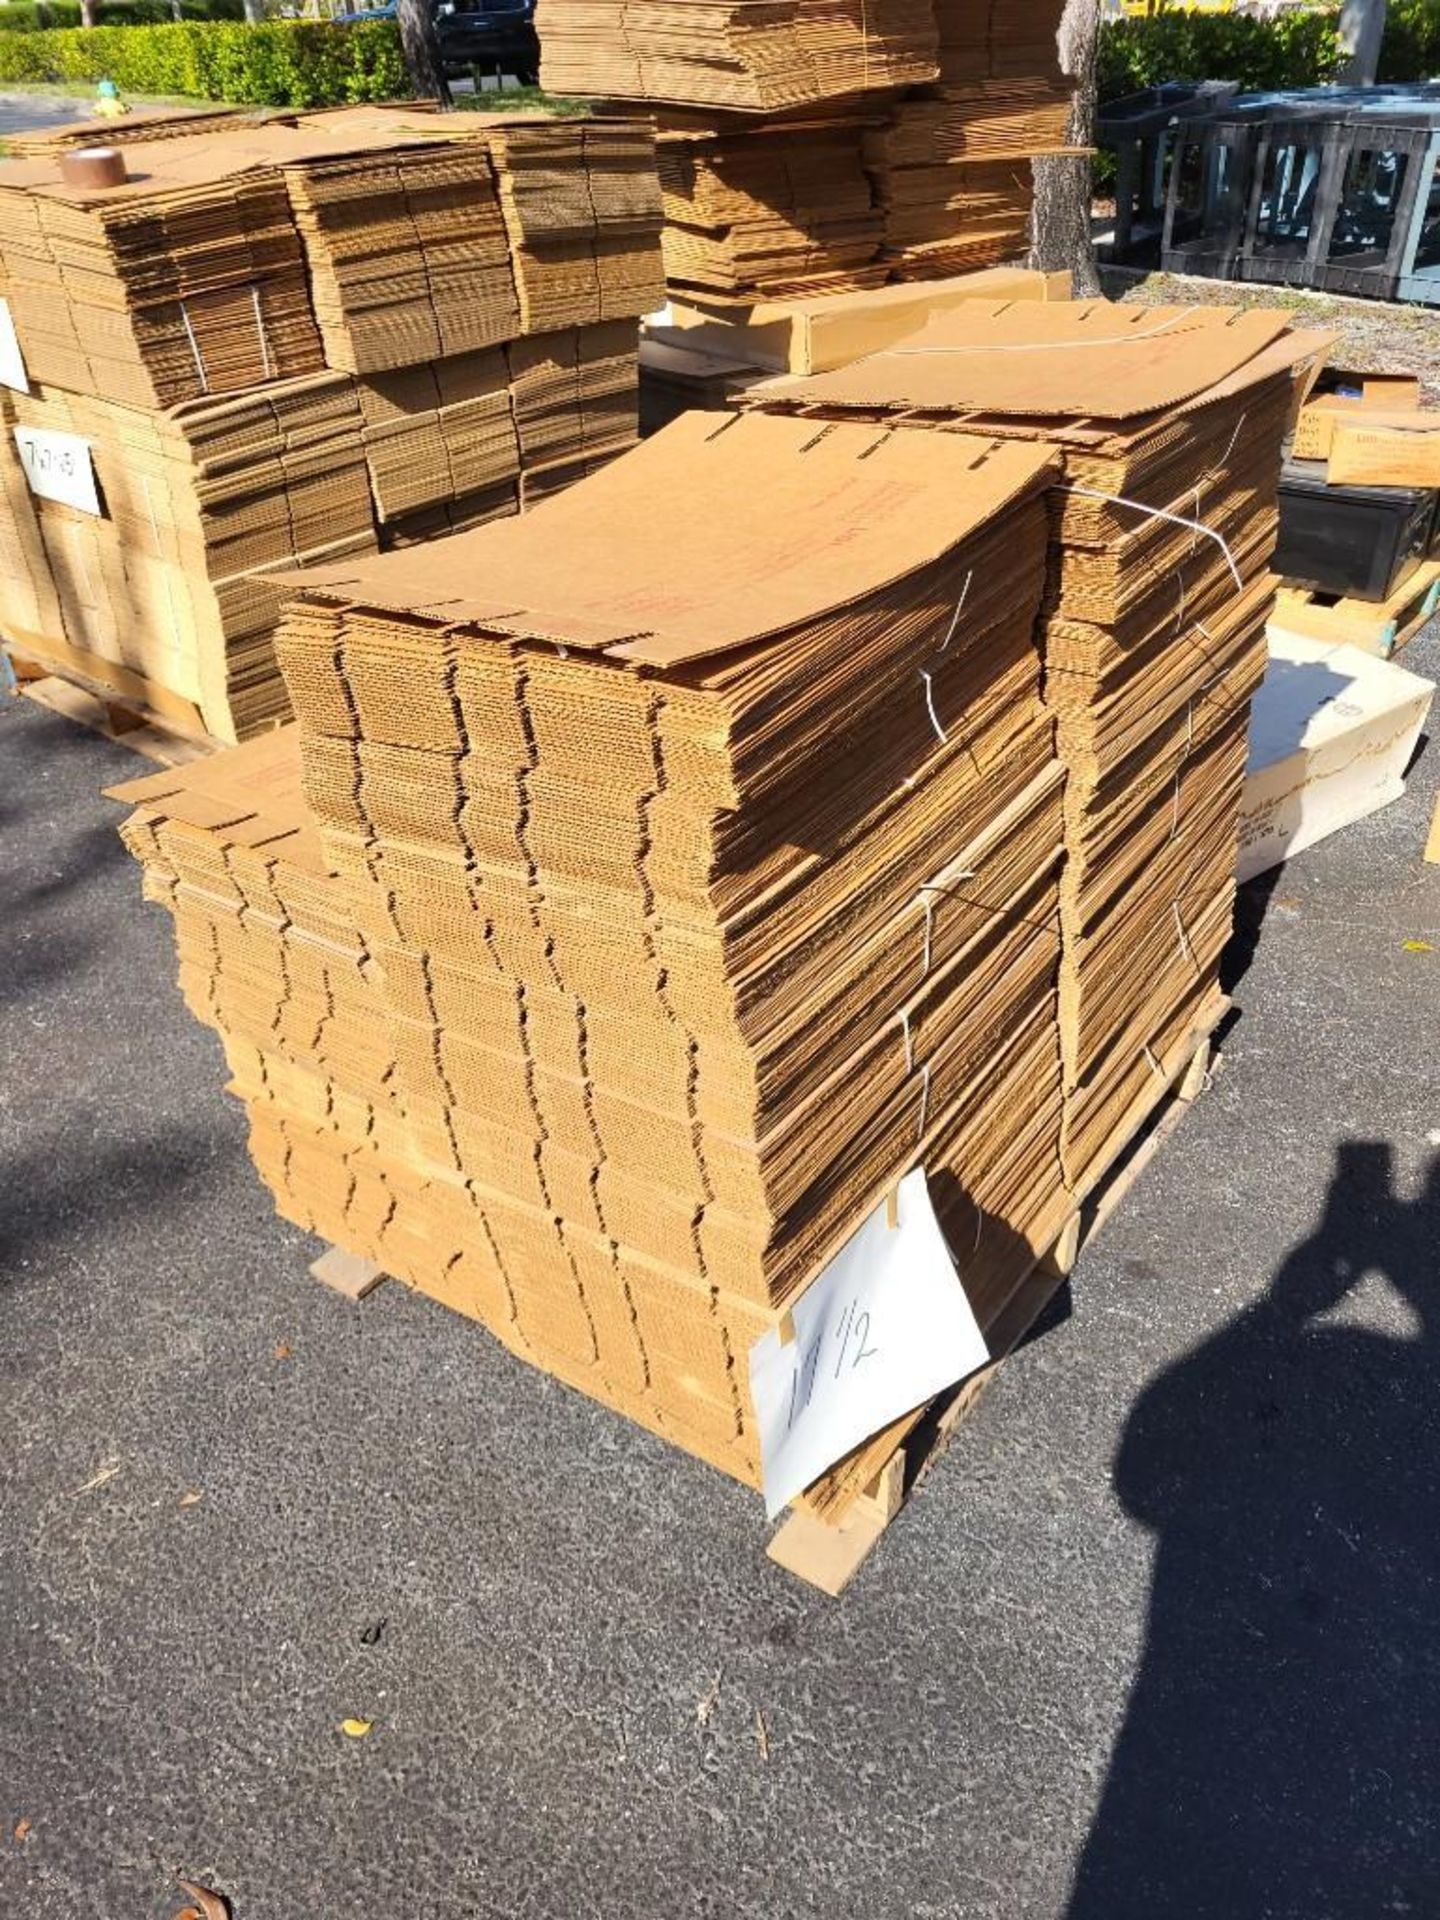 SHIPPING SUPPLIES - LONG CARDBOARD BOXES - Image 2 of 5